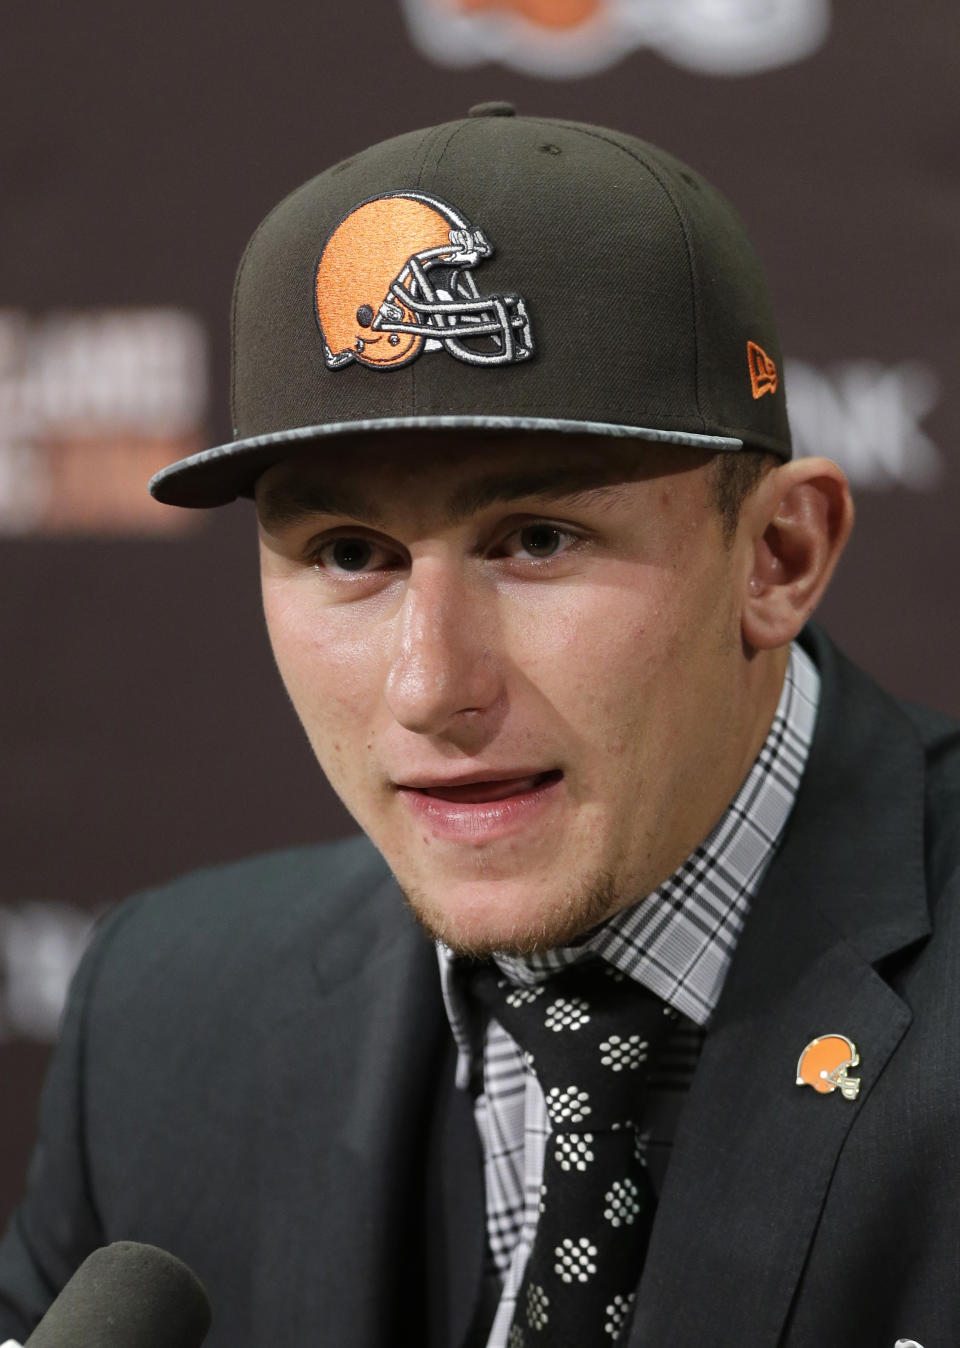 Cleveland Browns quarterback Johnny Manziel, from Texas A&M, answers questions at his introductory news conference at the NFL football team's facility in Berea, Ohio Friday, May 9, 2014. The Browns selected Manziel 22nd overall in the first round of Thursday's NFL draft, after taking Oklahoma State cornerback Justin Gilbert with the eighth overall pick. (AP Photo/Mark Duncan)